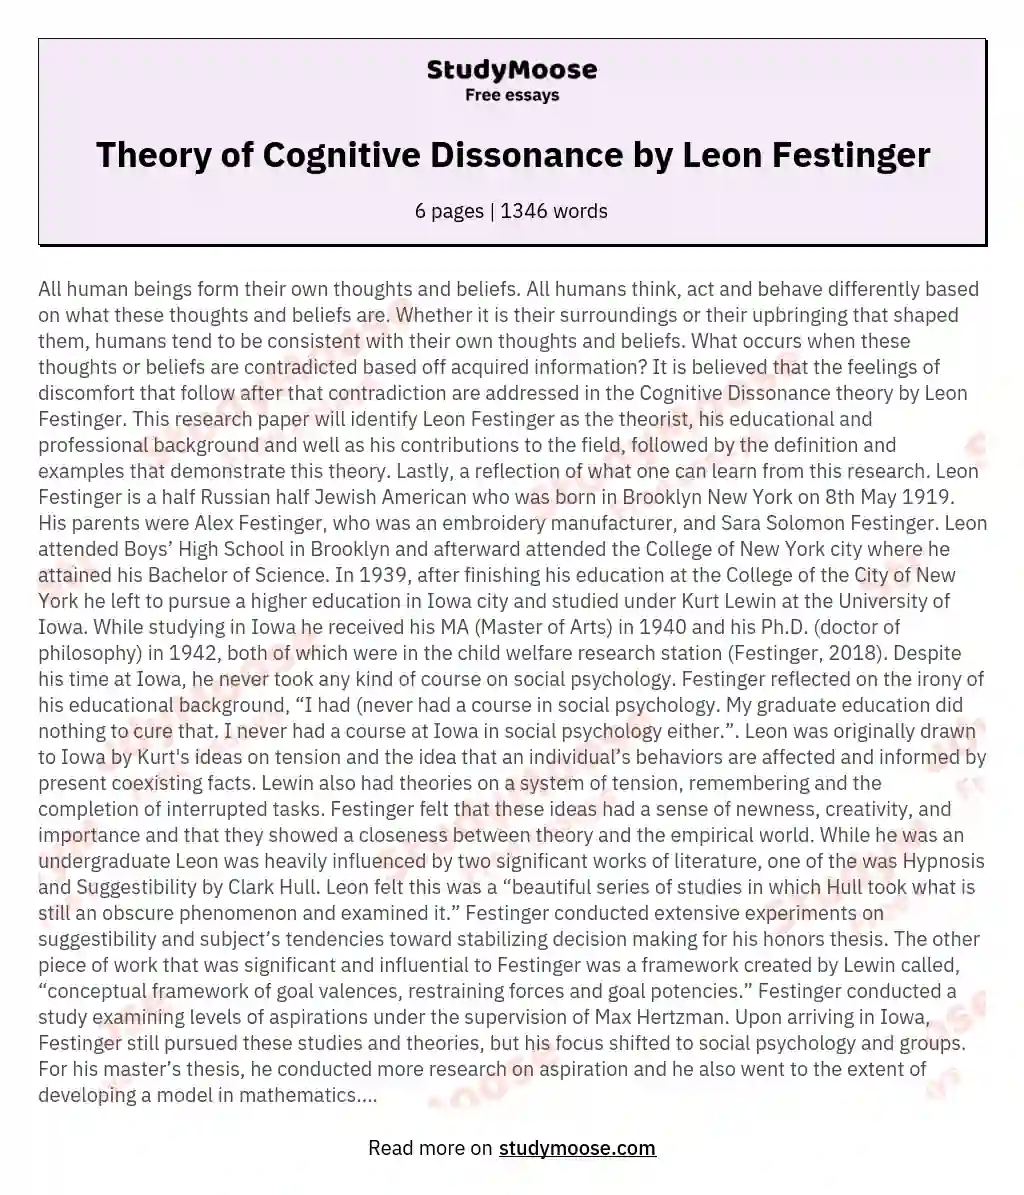 Theory of Cognitive Dissonance by Leon Festinger essay